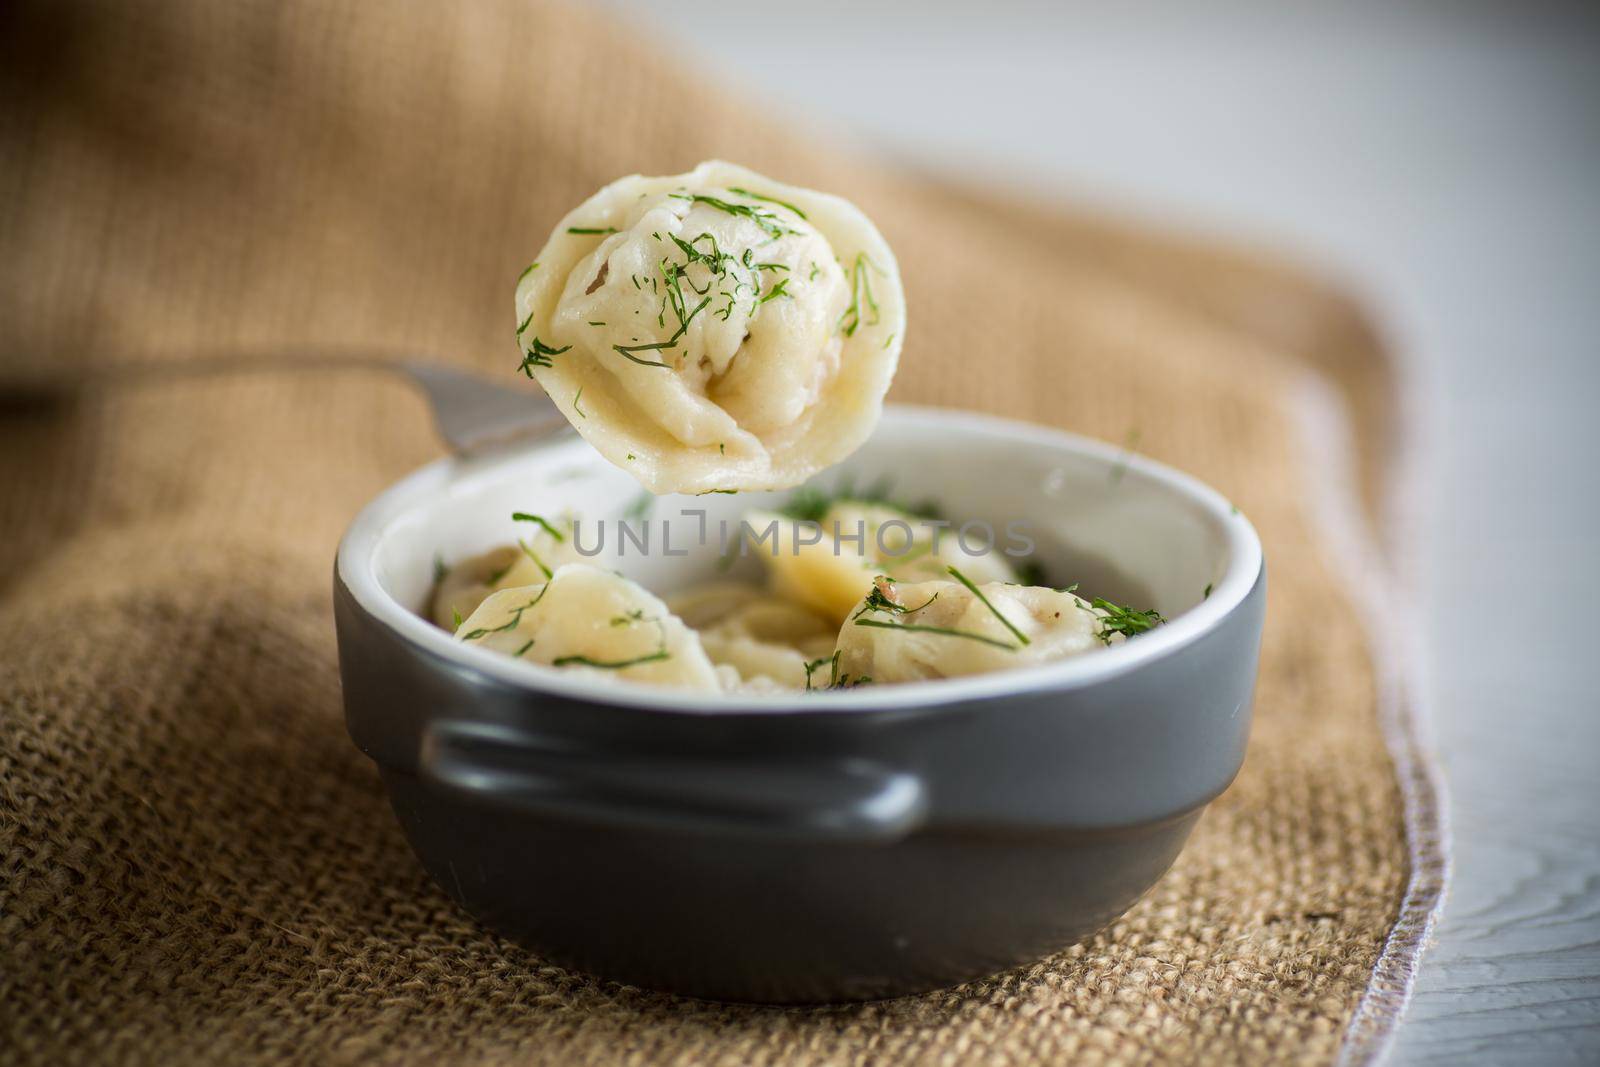 boiled dumplings with meat filling in a bowl on the table